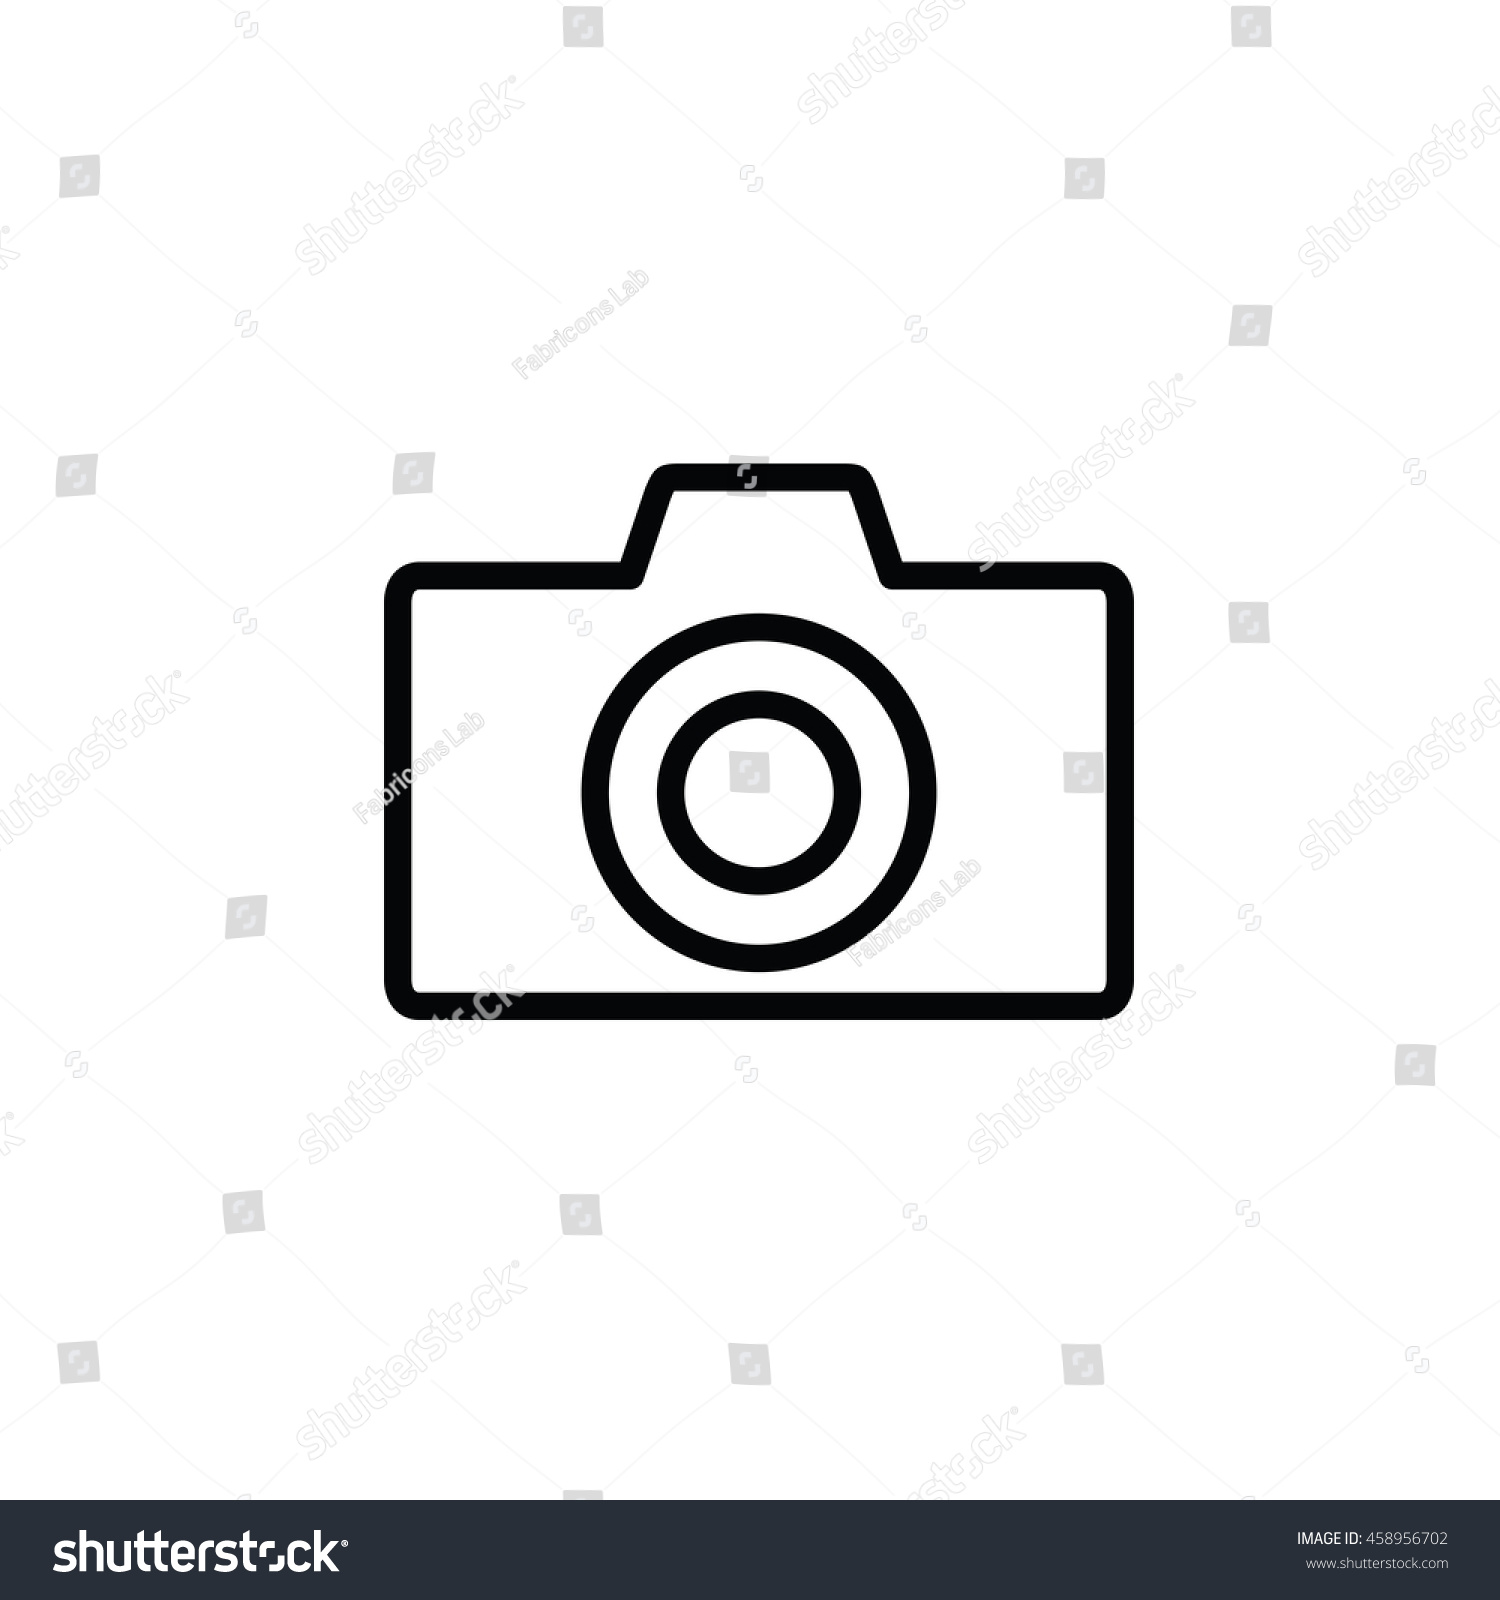 Digital camera icon, symbol or logo in outline style for art 